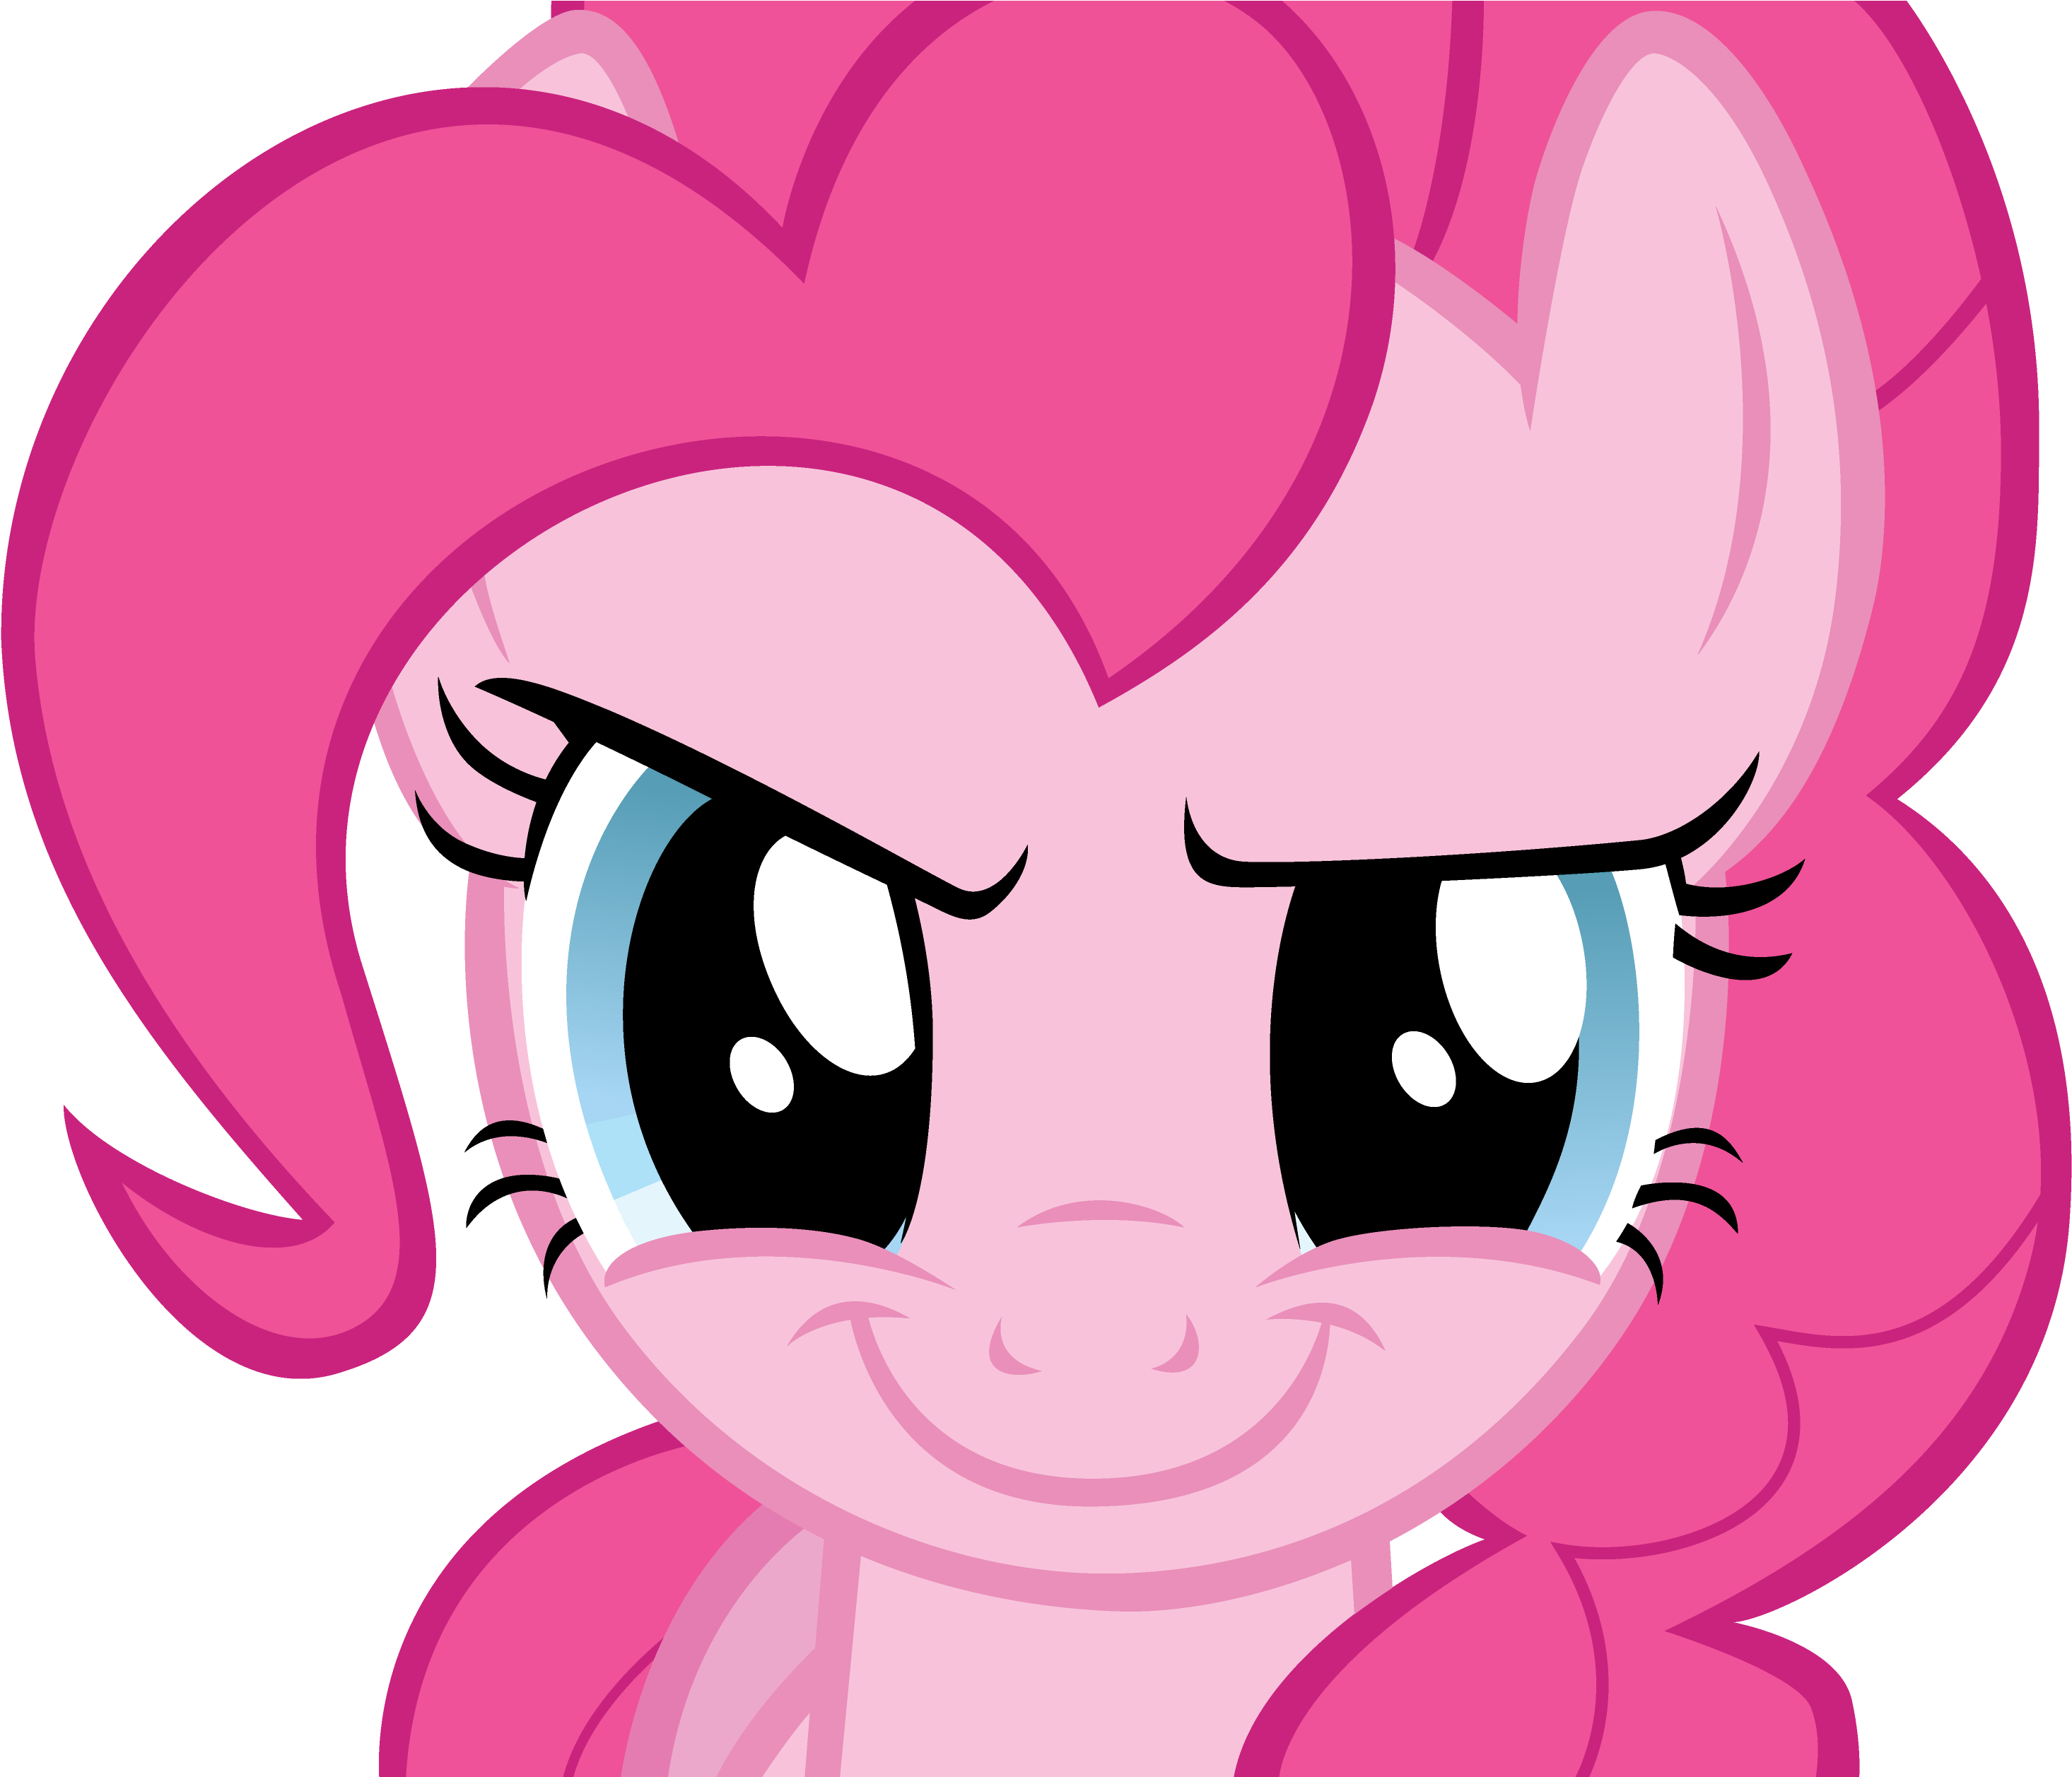 Pinkie Pie Face Hair Pink Nose Red Cartoon Facial Expression - Little Pony Friendship Is Magic (3382x2513)